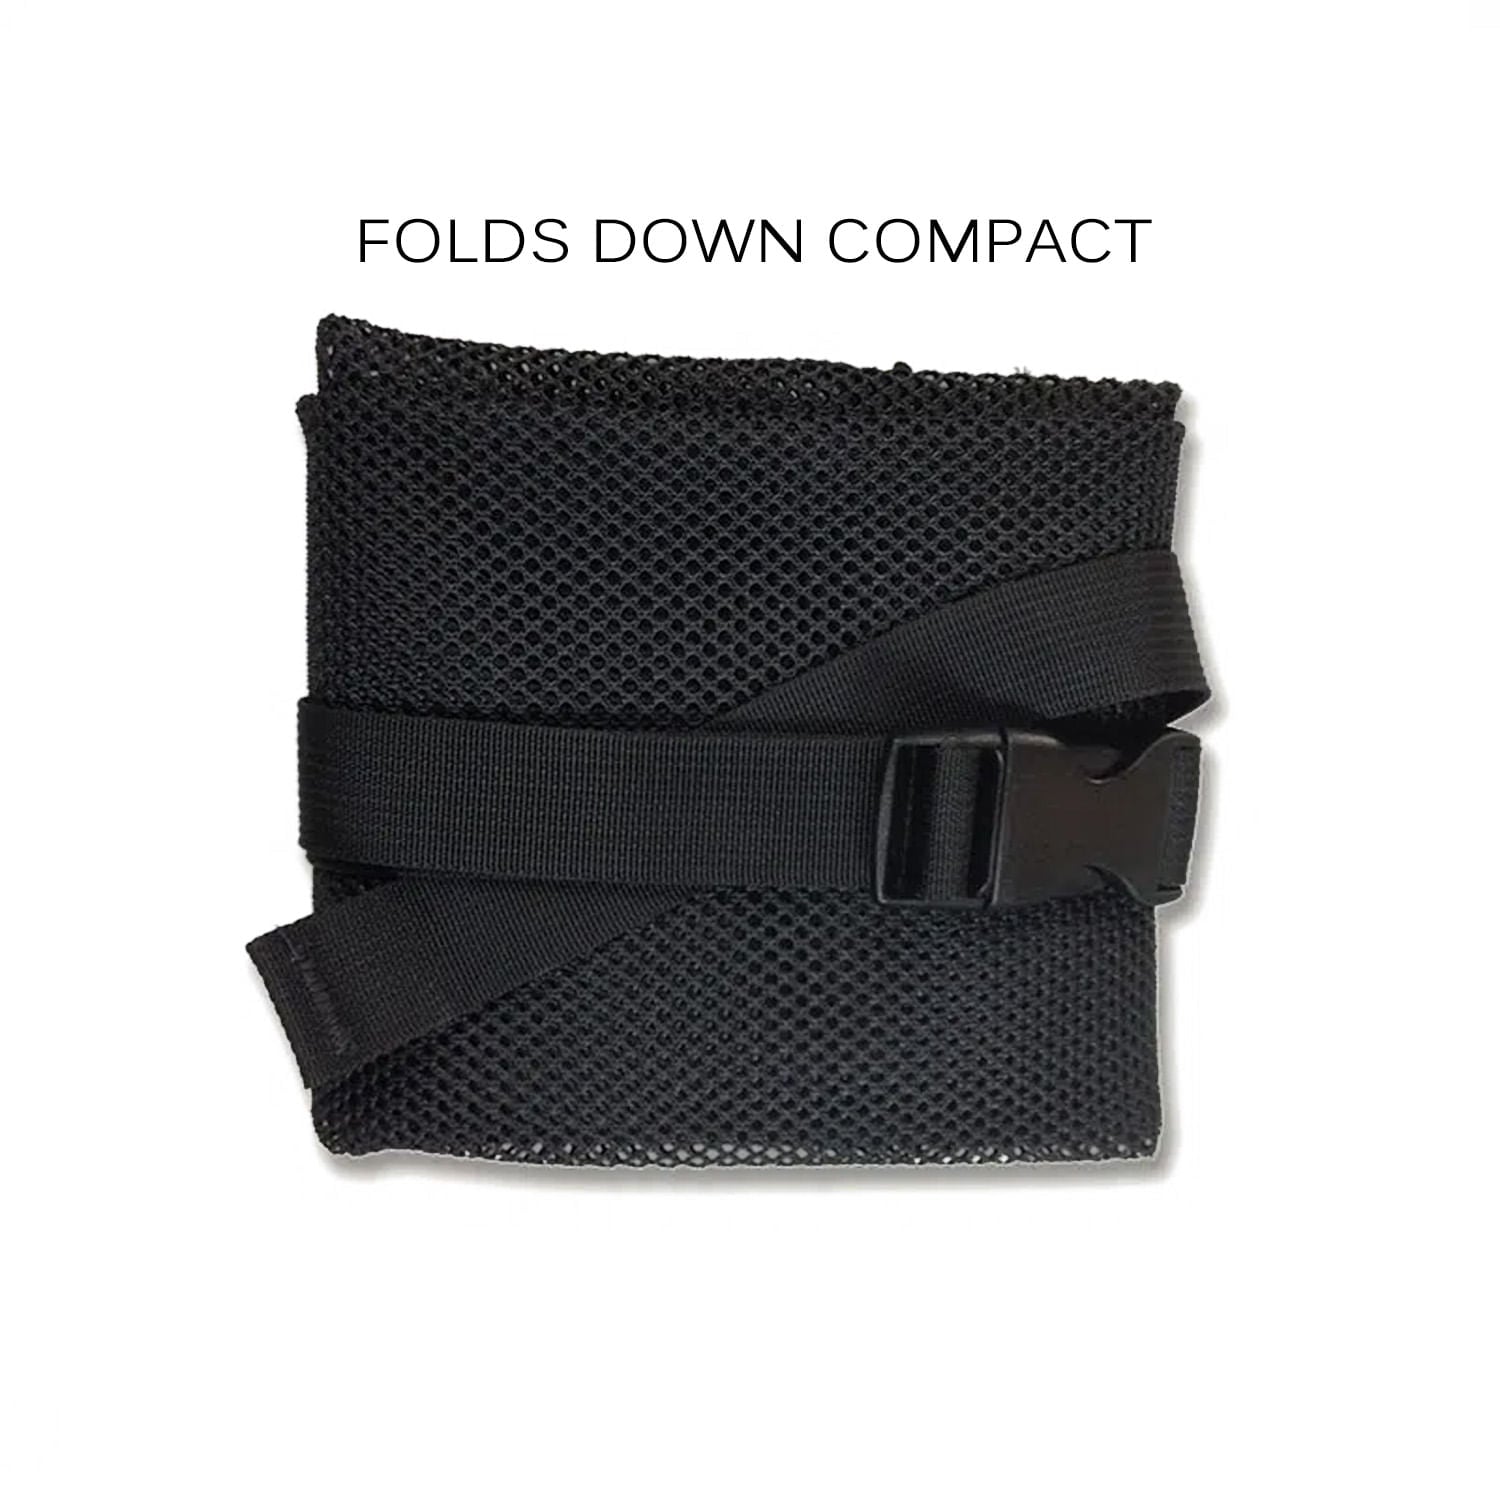 Folds down compact